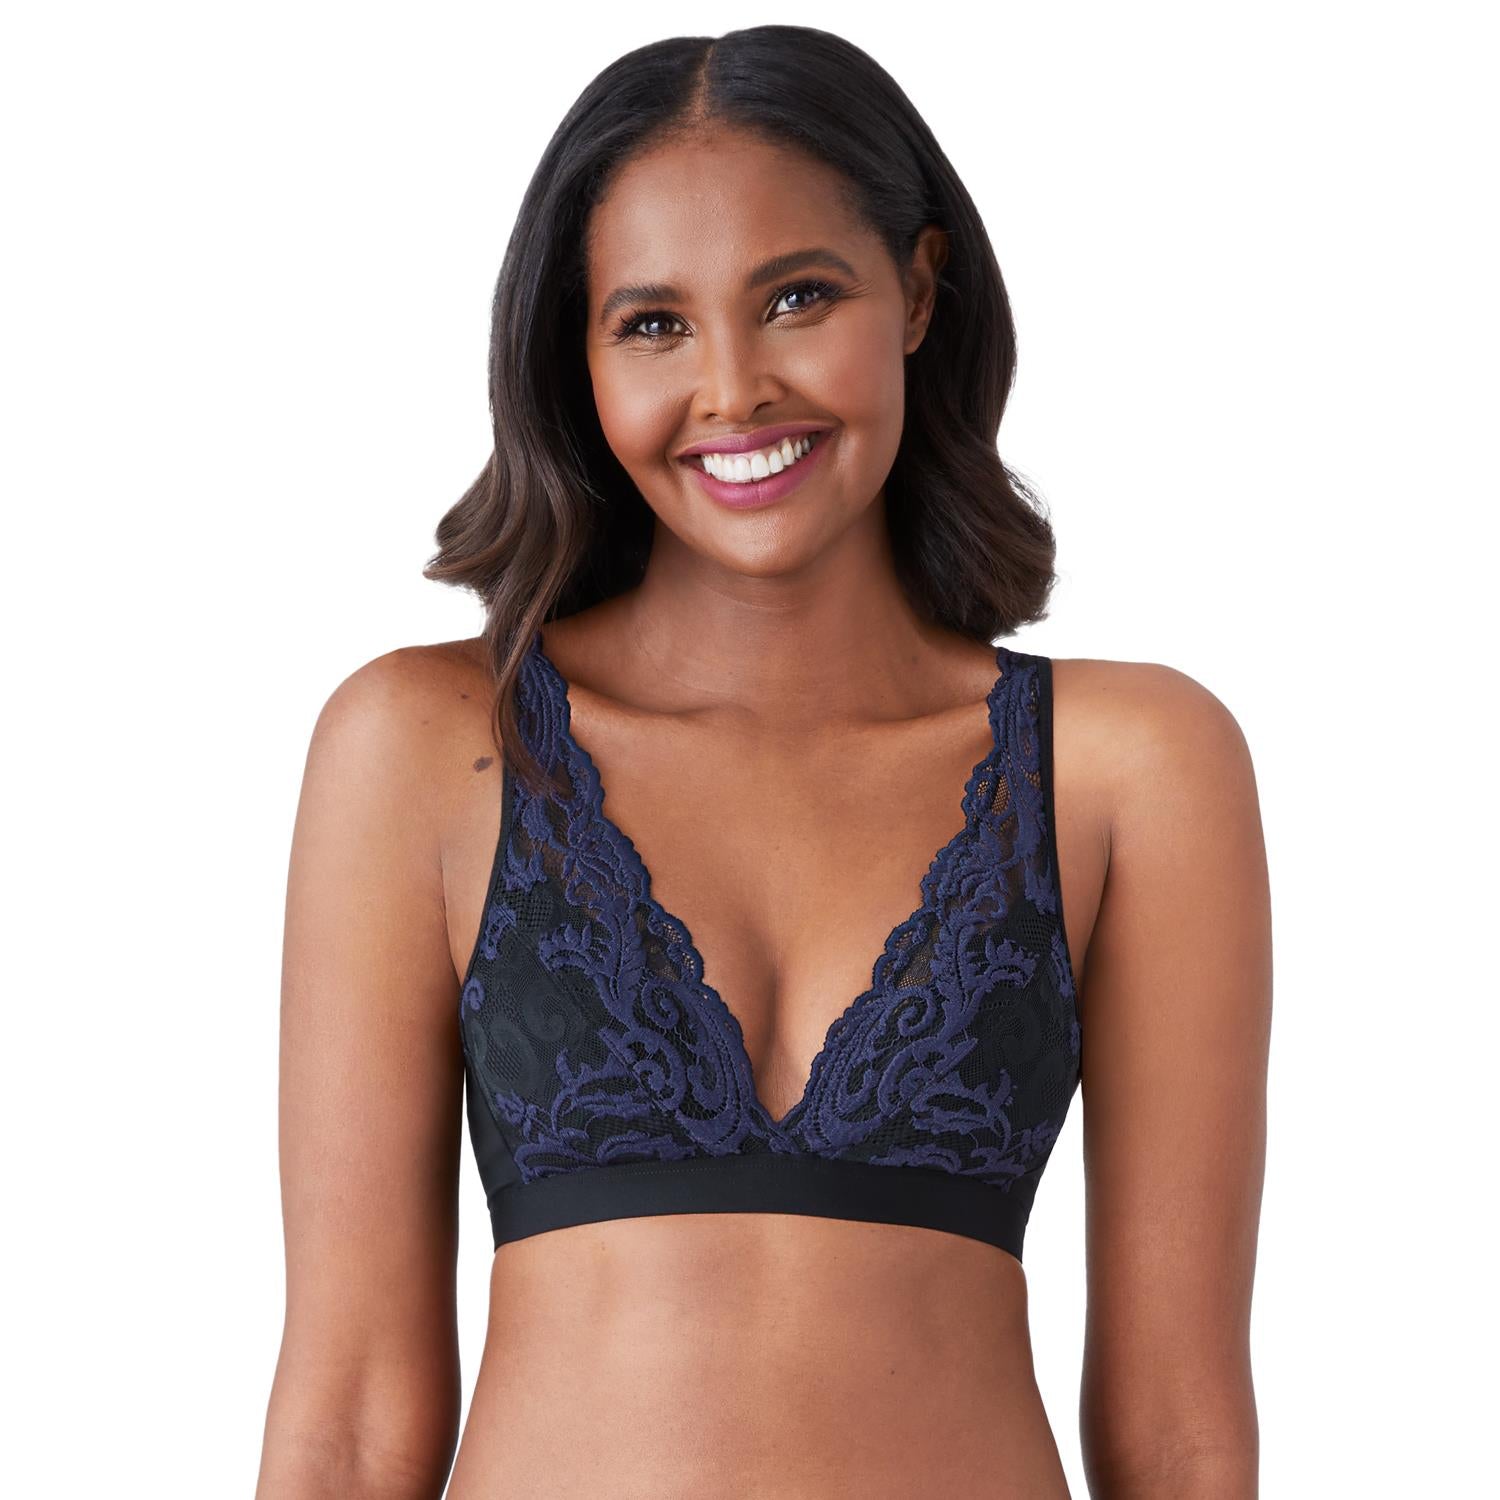 Vicanie's The Bra Fitting Specialists - The B-Smooth front closure bralette  from Wacoal is a super comfy, wireless style with front hook and eye  closure. This makes this style ideal for post